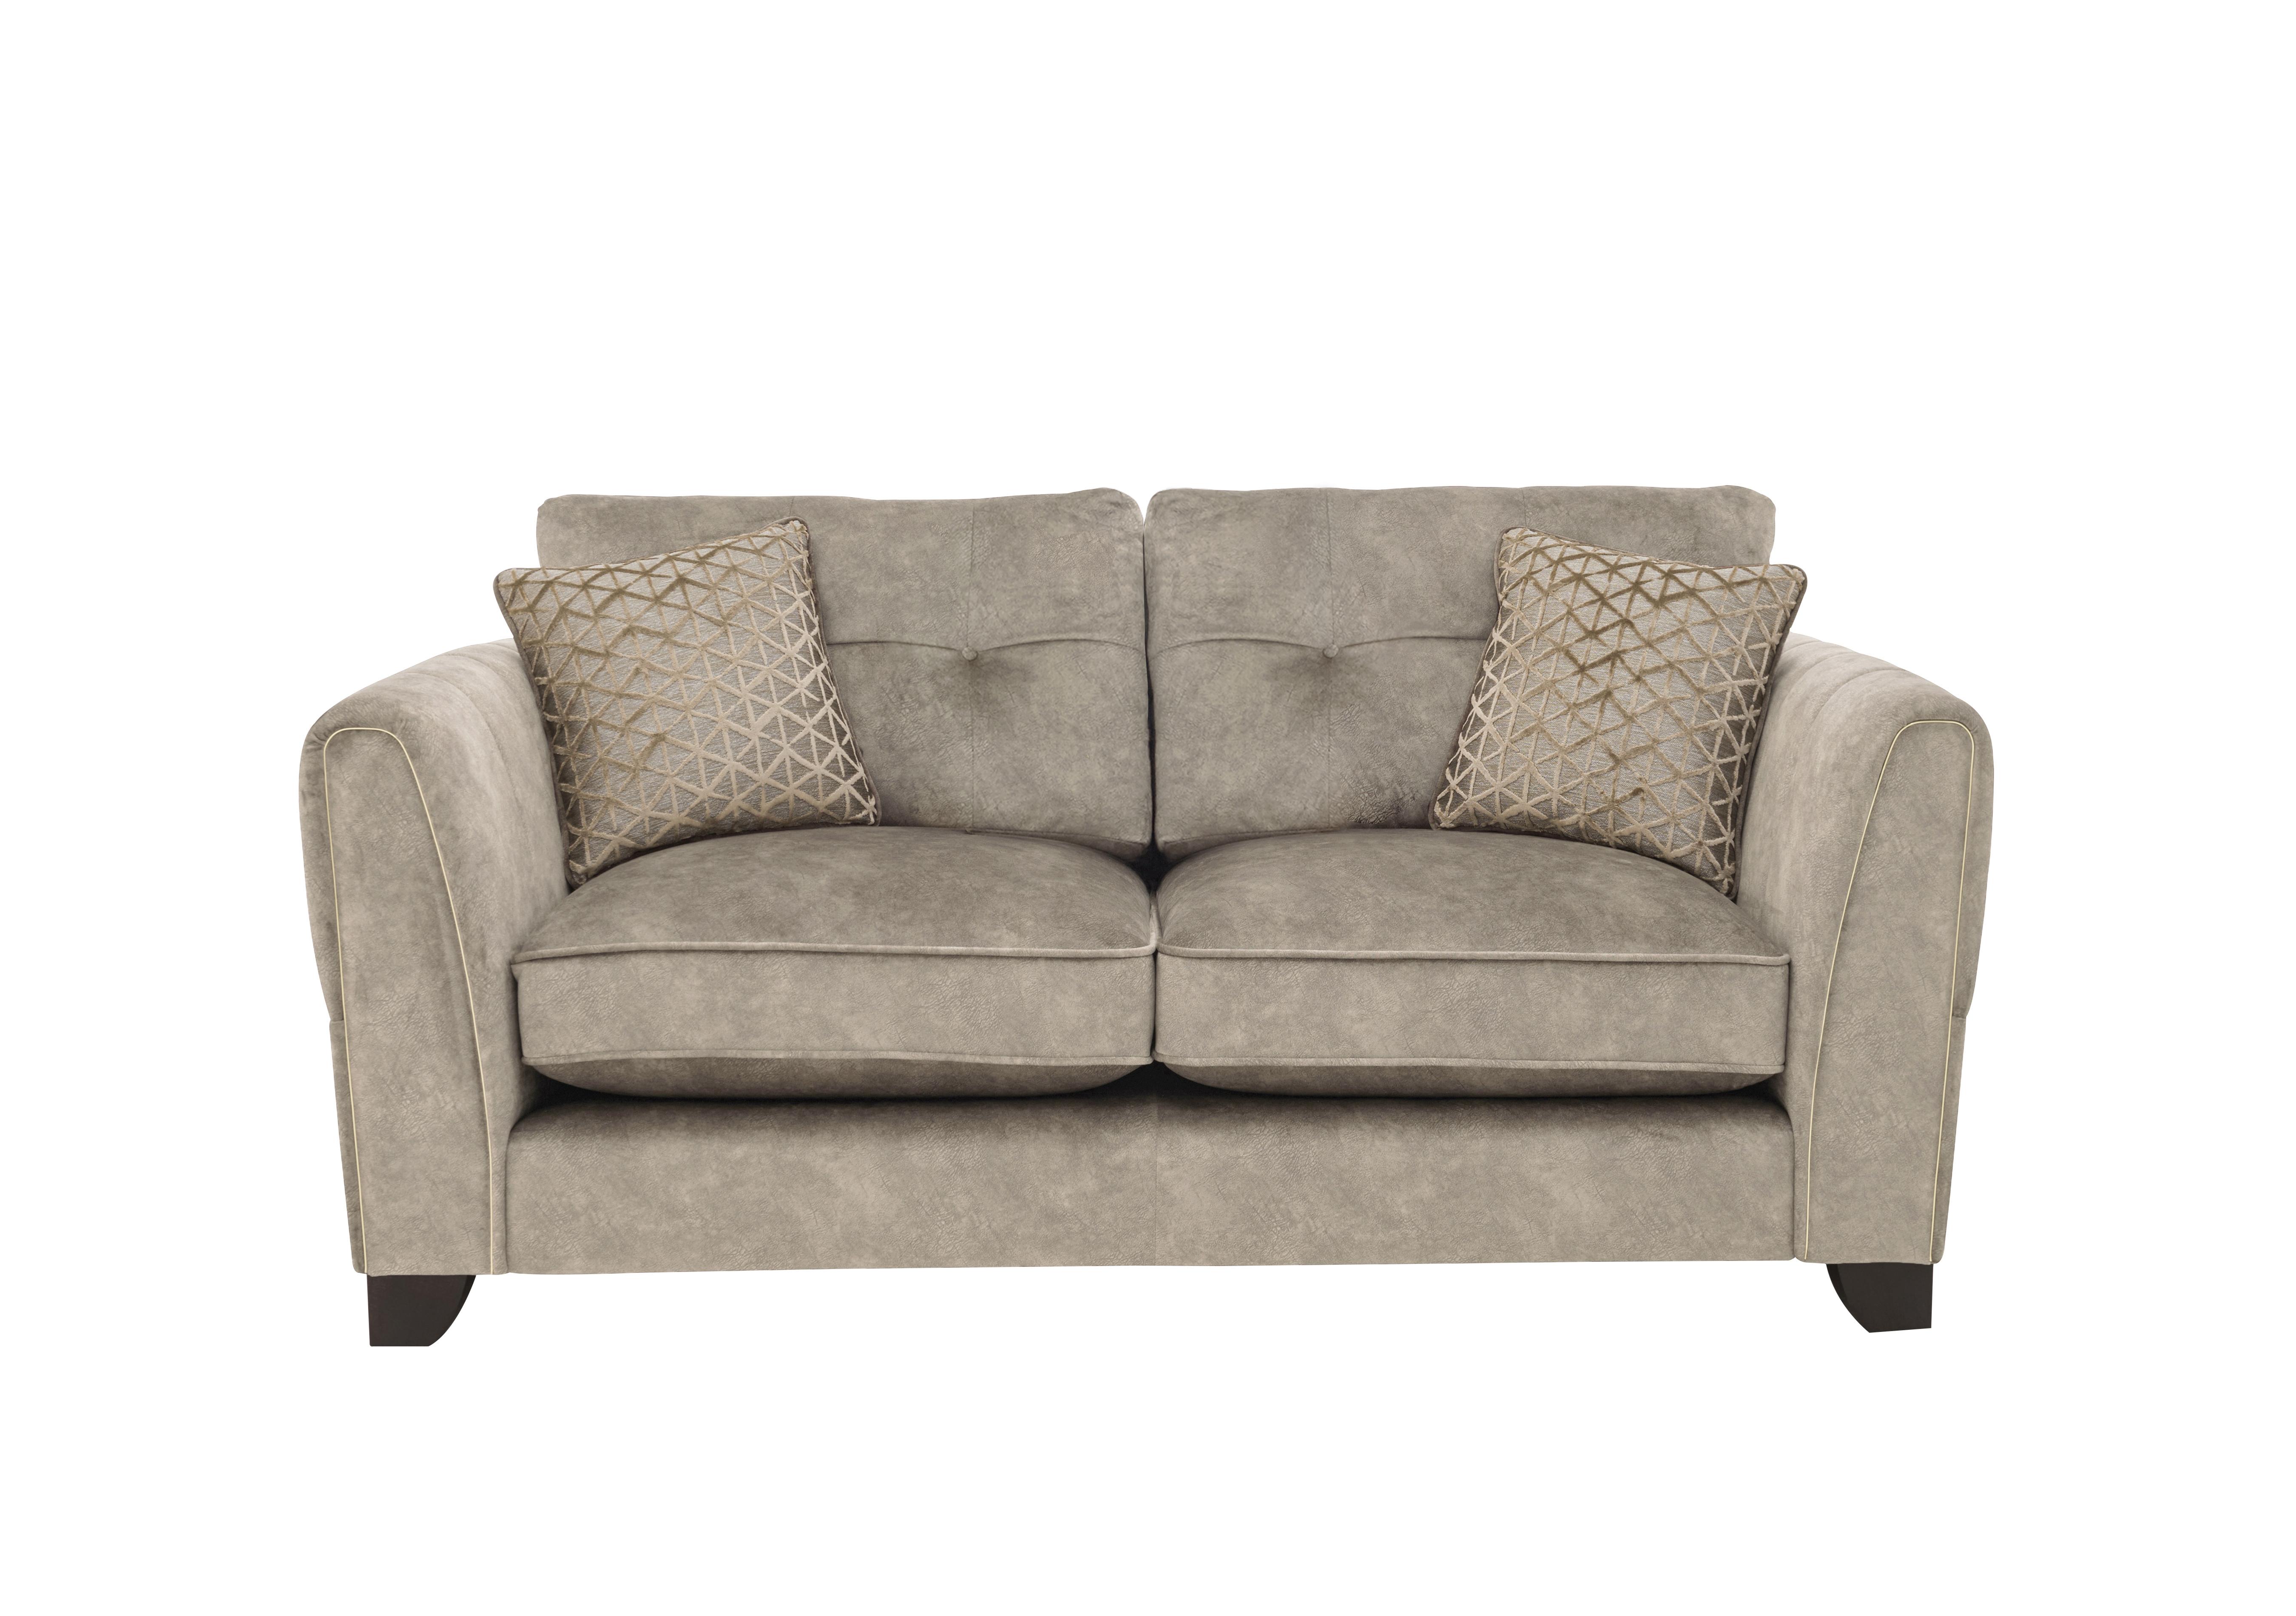 Ariana 2 Seater Fabric Classic Back Sofa in Dapple Oyster Brass Insert on Furniture Village